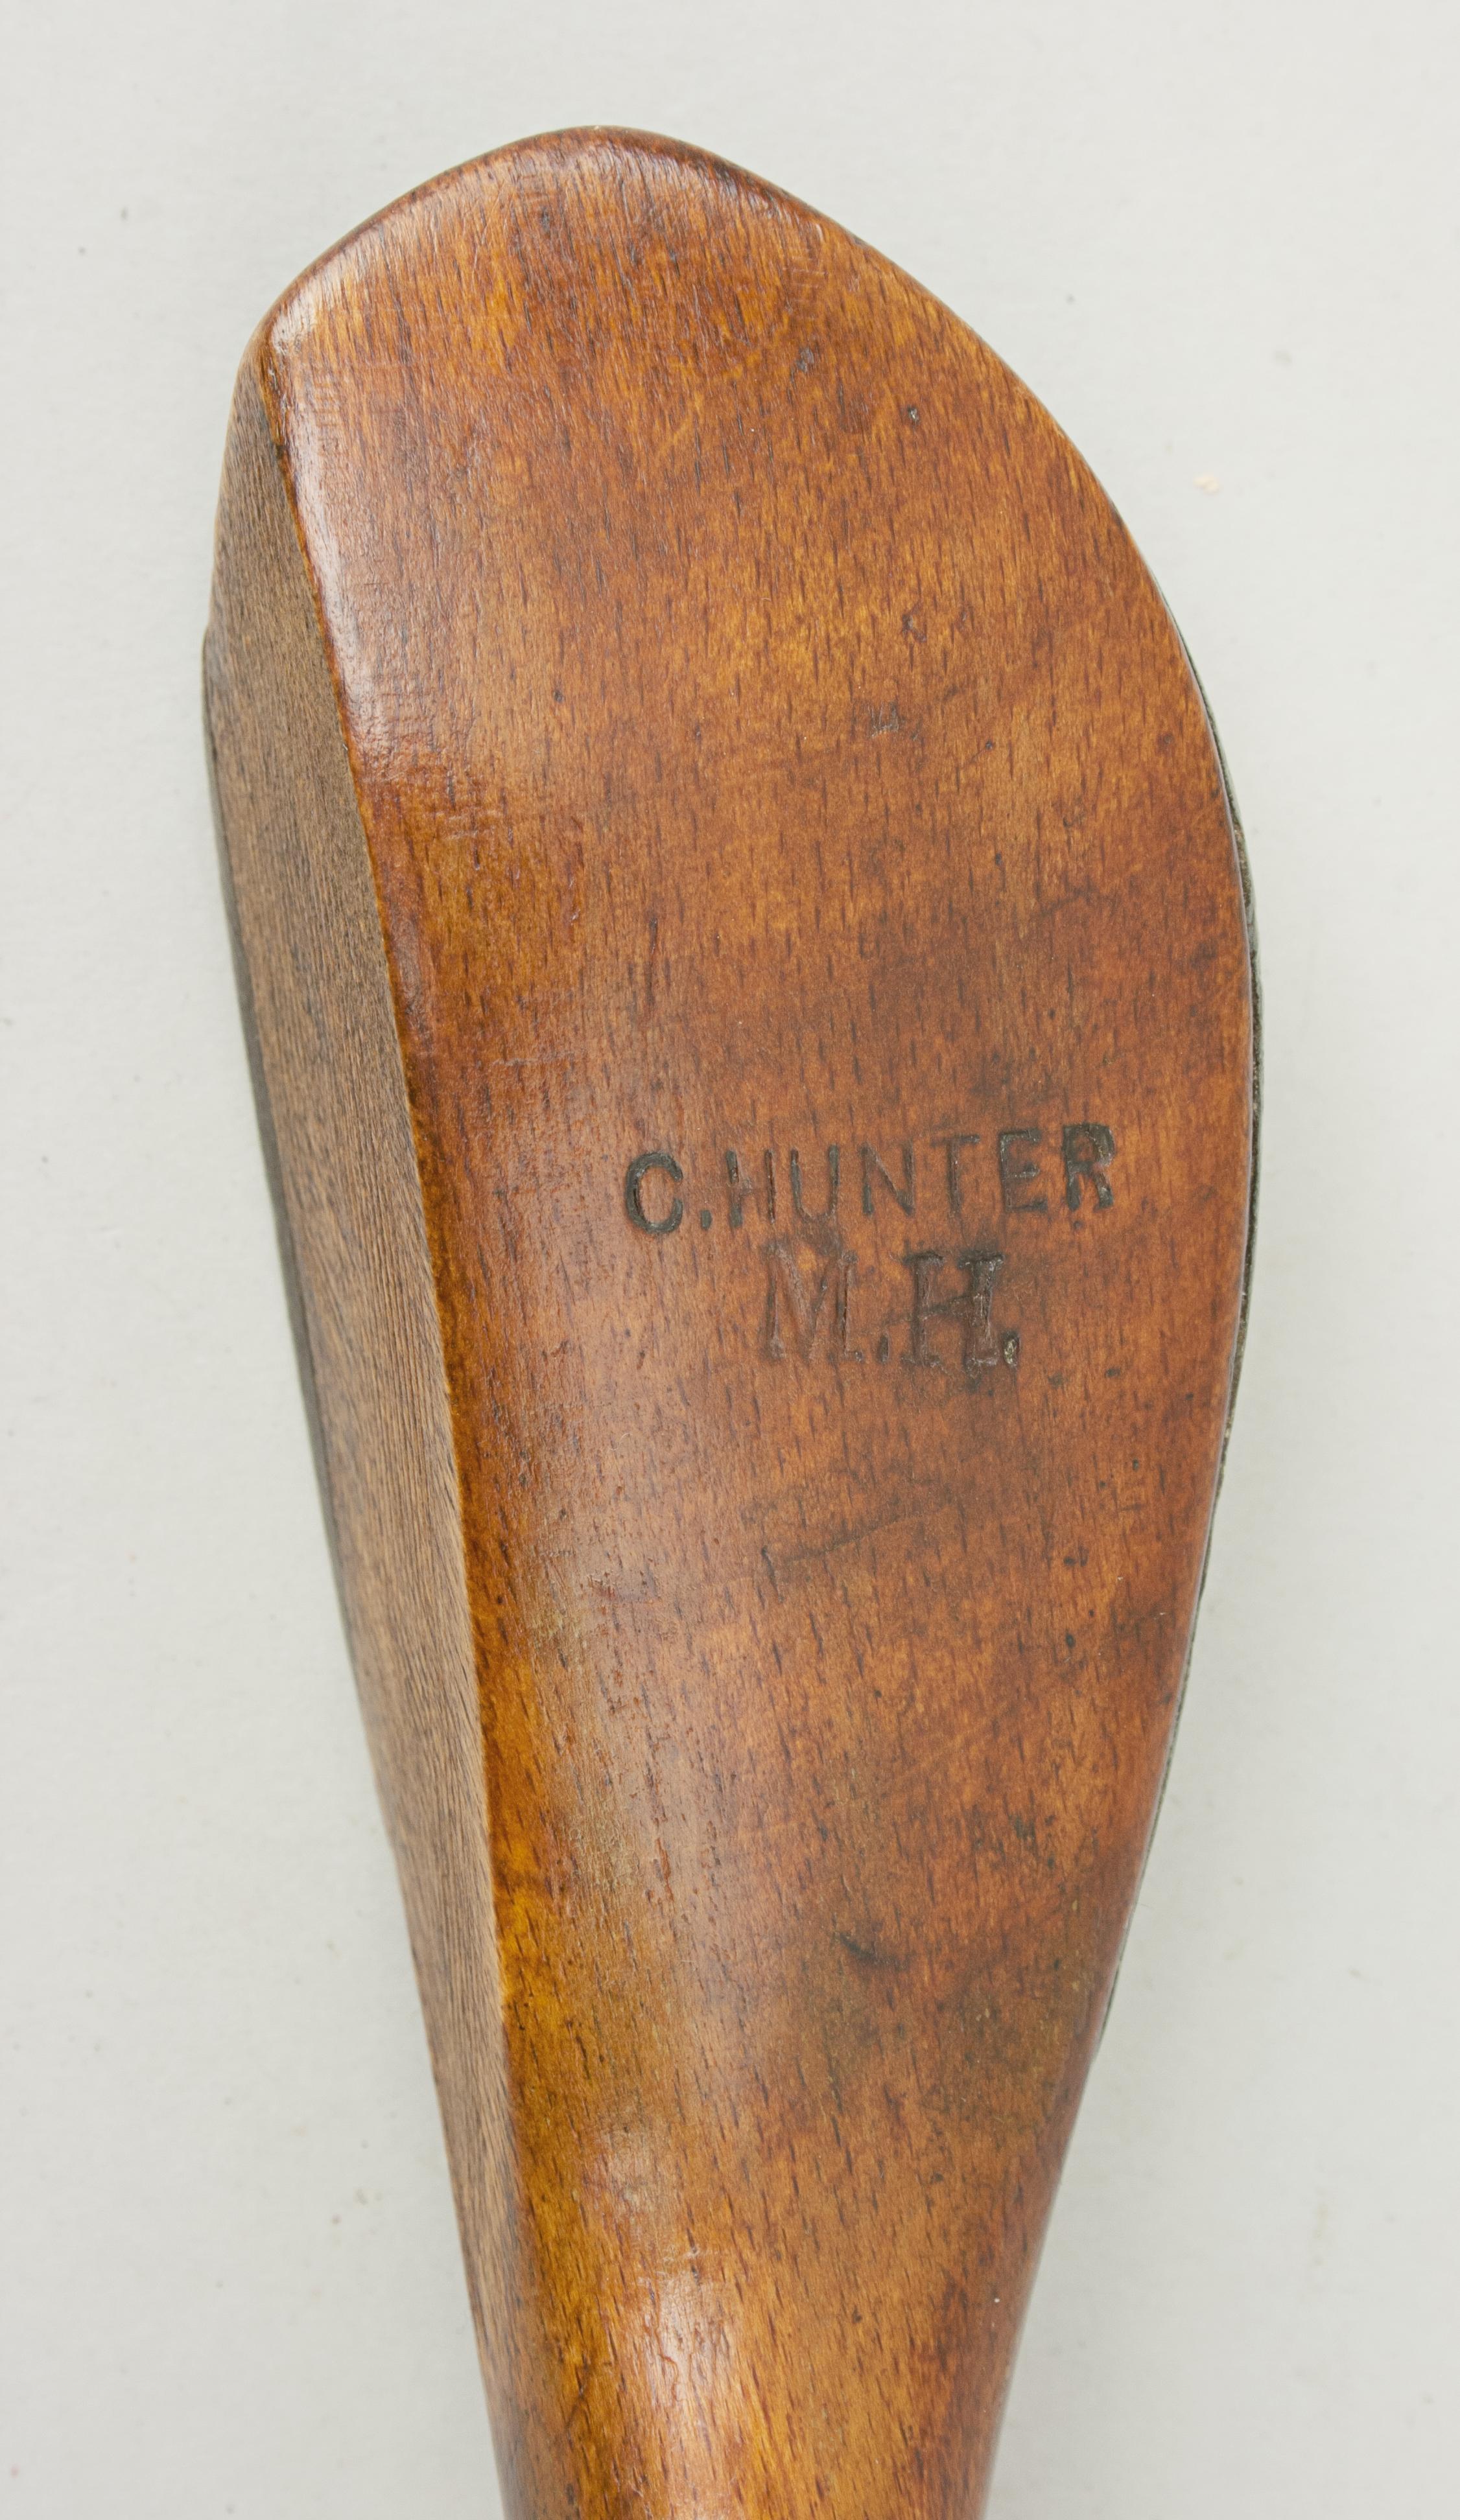 Late 19th Century Long Nose Golf Club by Charlie Hunter